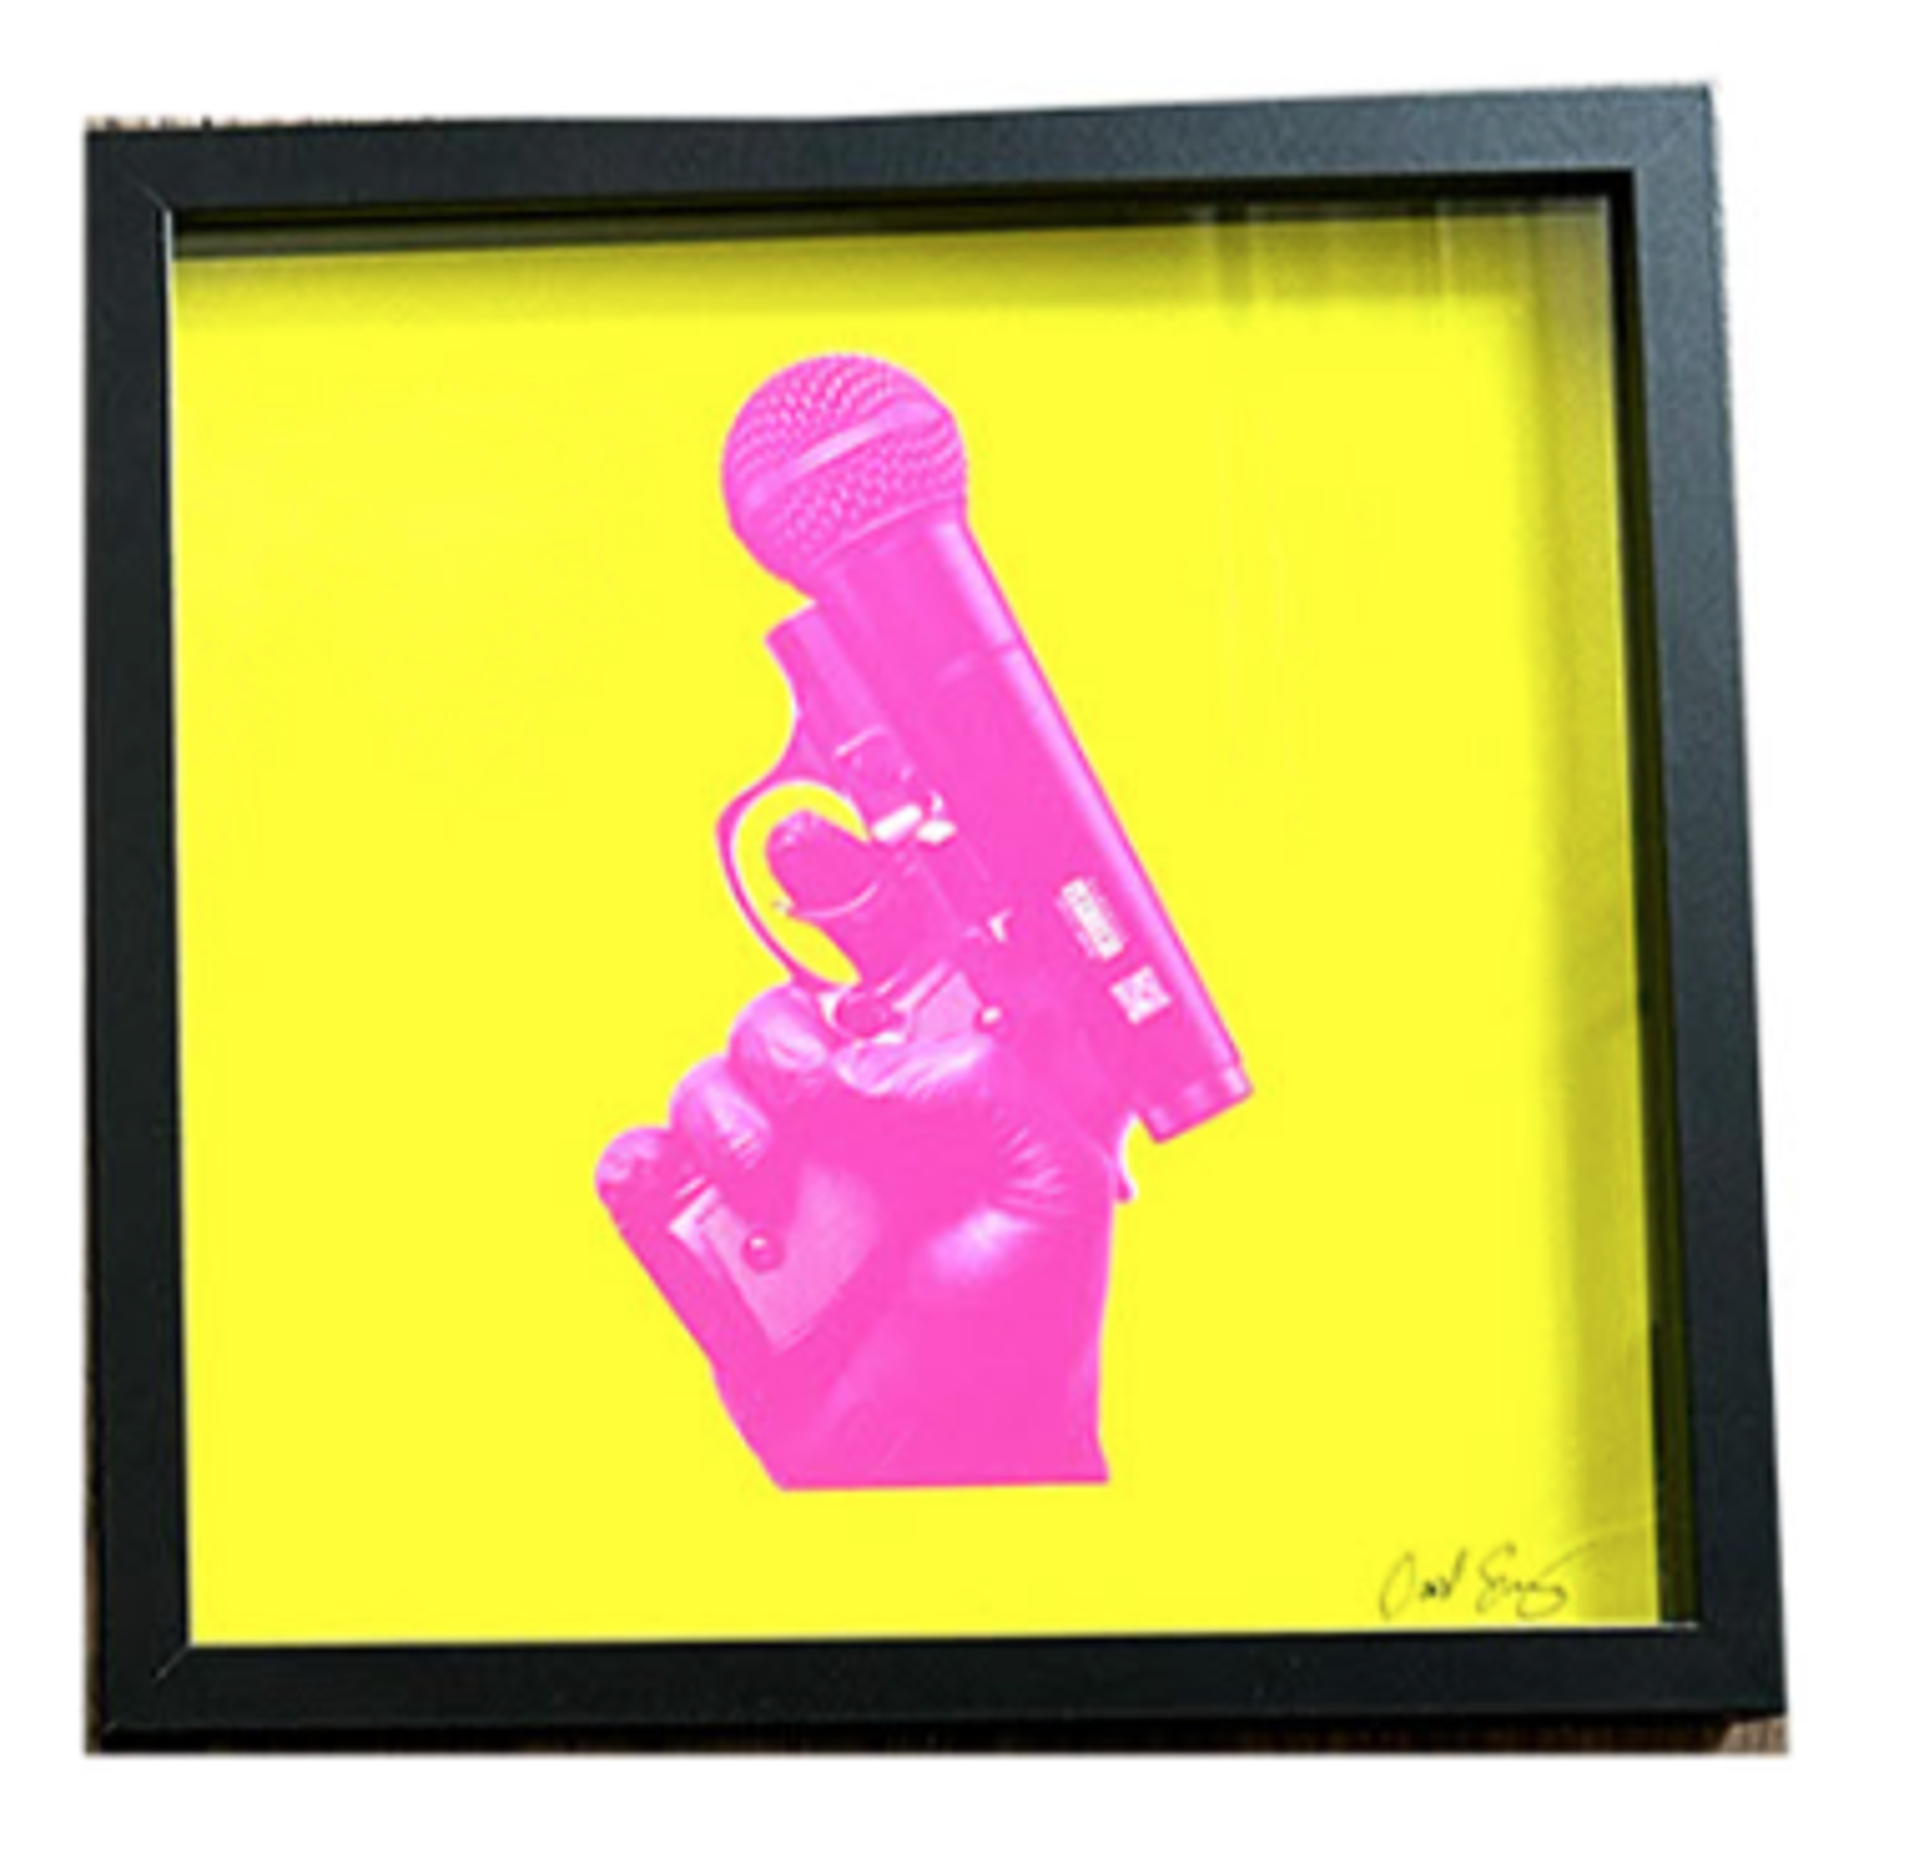 The Tongue is Mightier Than the Gun (pink & yellow) by David Schwartz